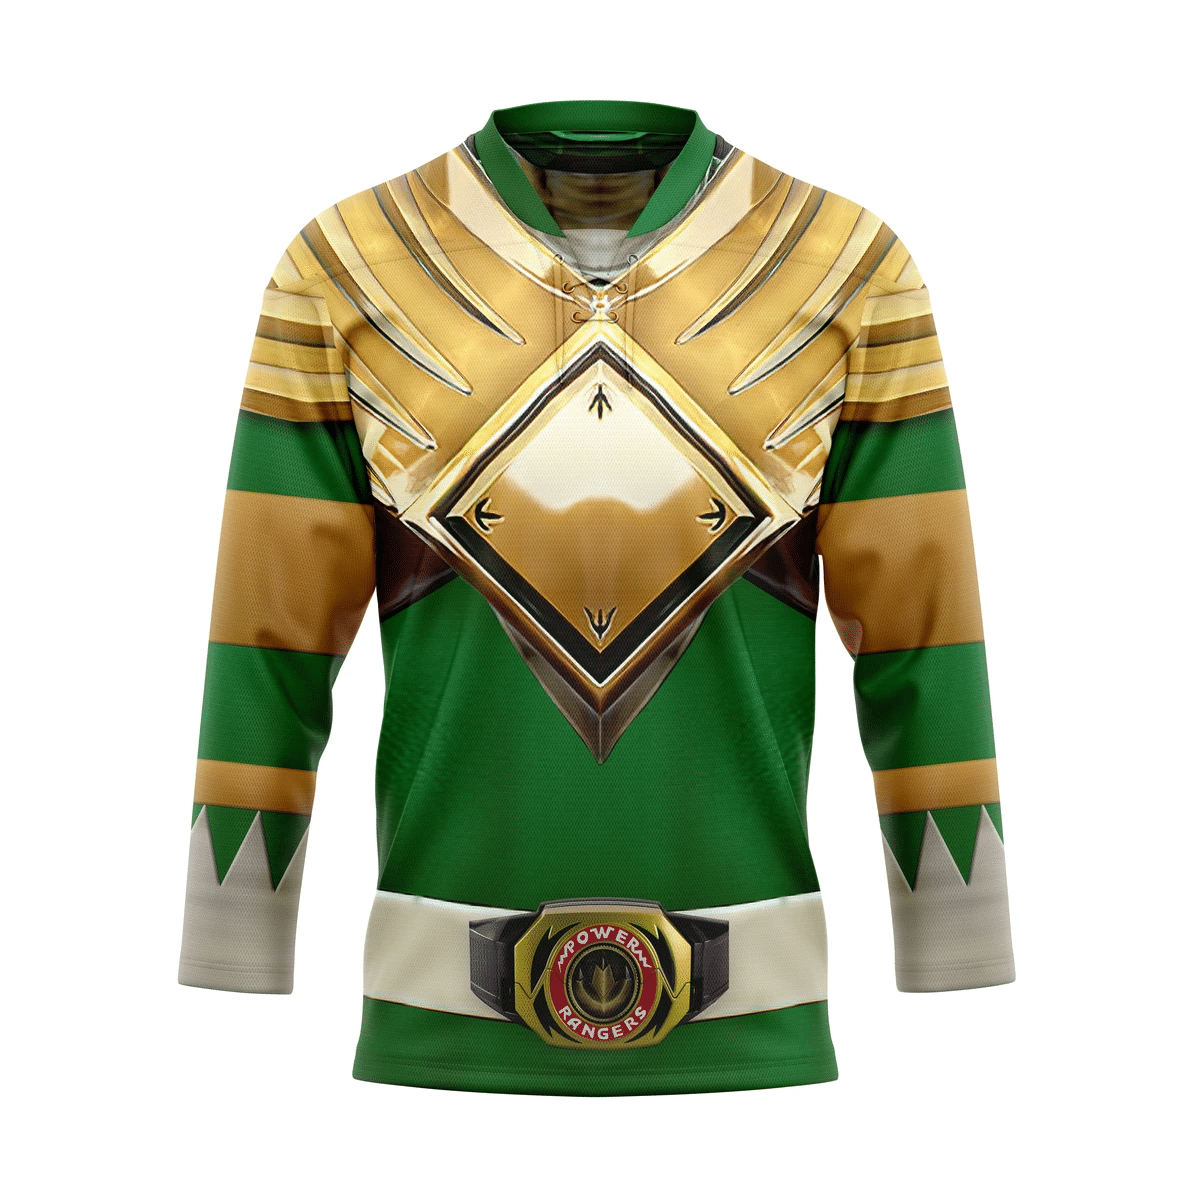 The hockey jersey is one of the most important items to have as a sports fan. 283